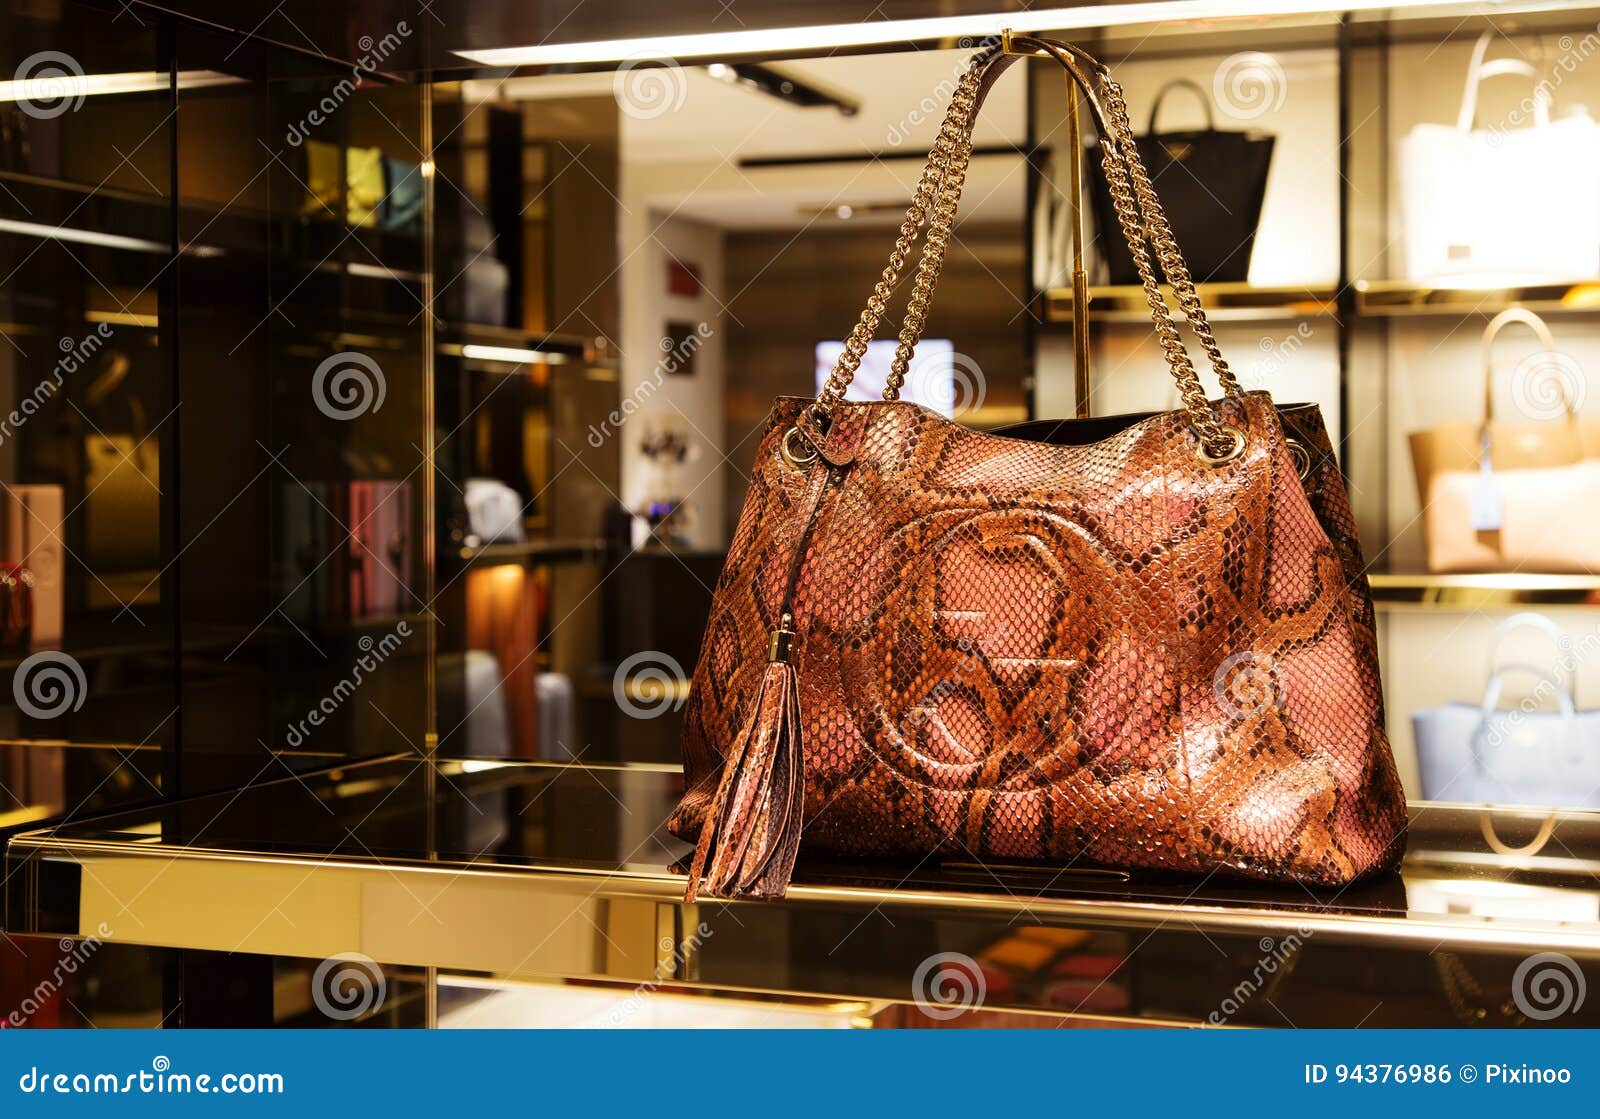 Italy, Venice - March 20, 2015: Handbags In A Gucci Store In Old Editorial Photo - Image of ...